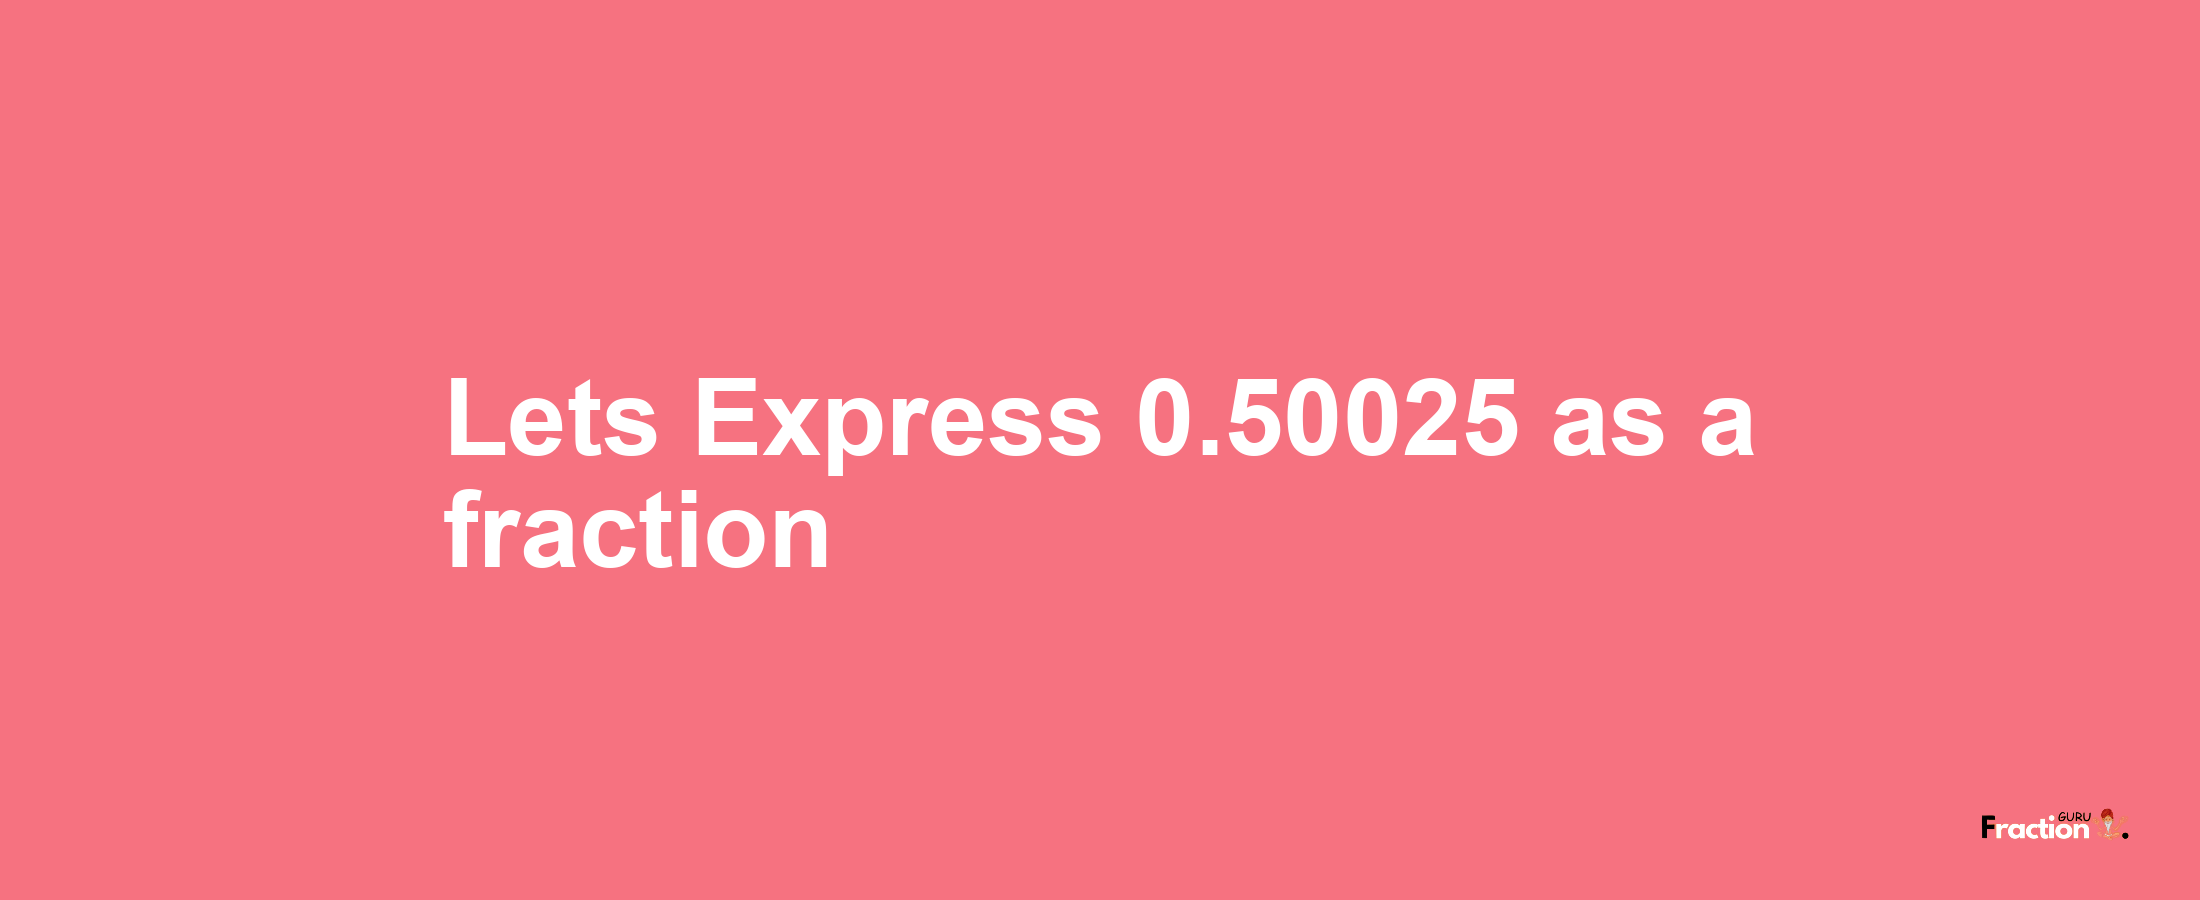 Lets Express 0.50025 as afraction